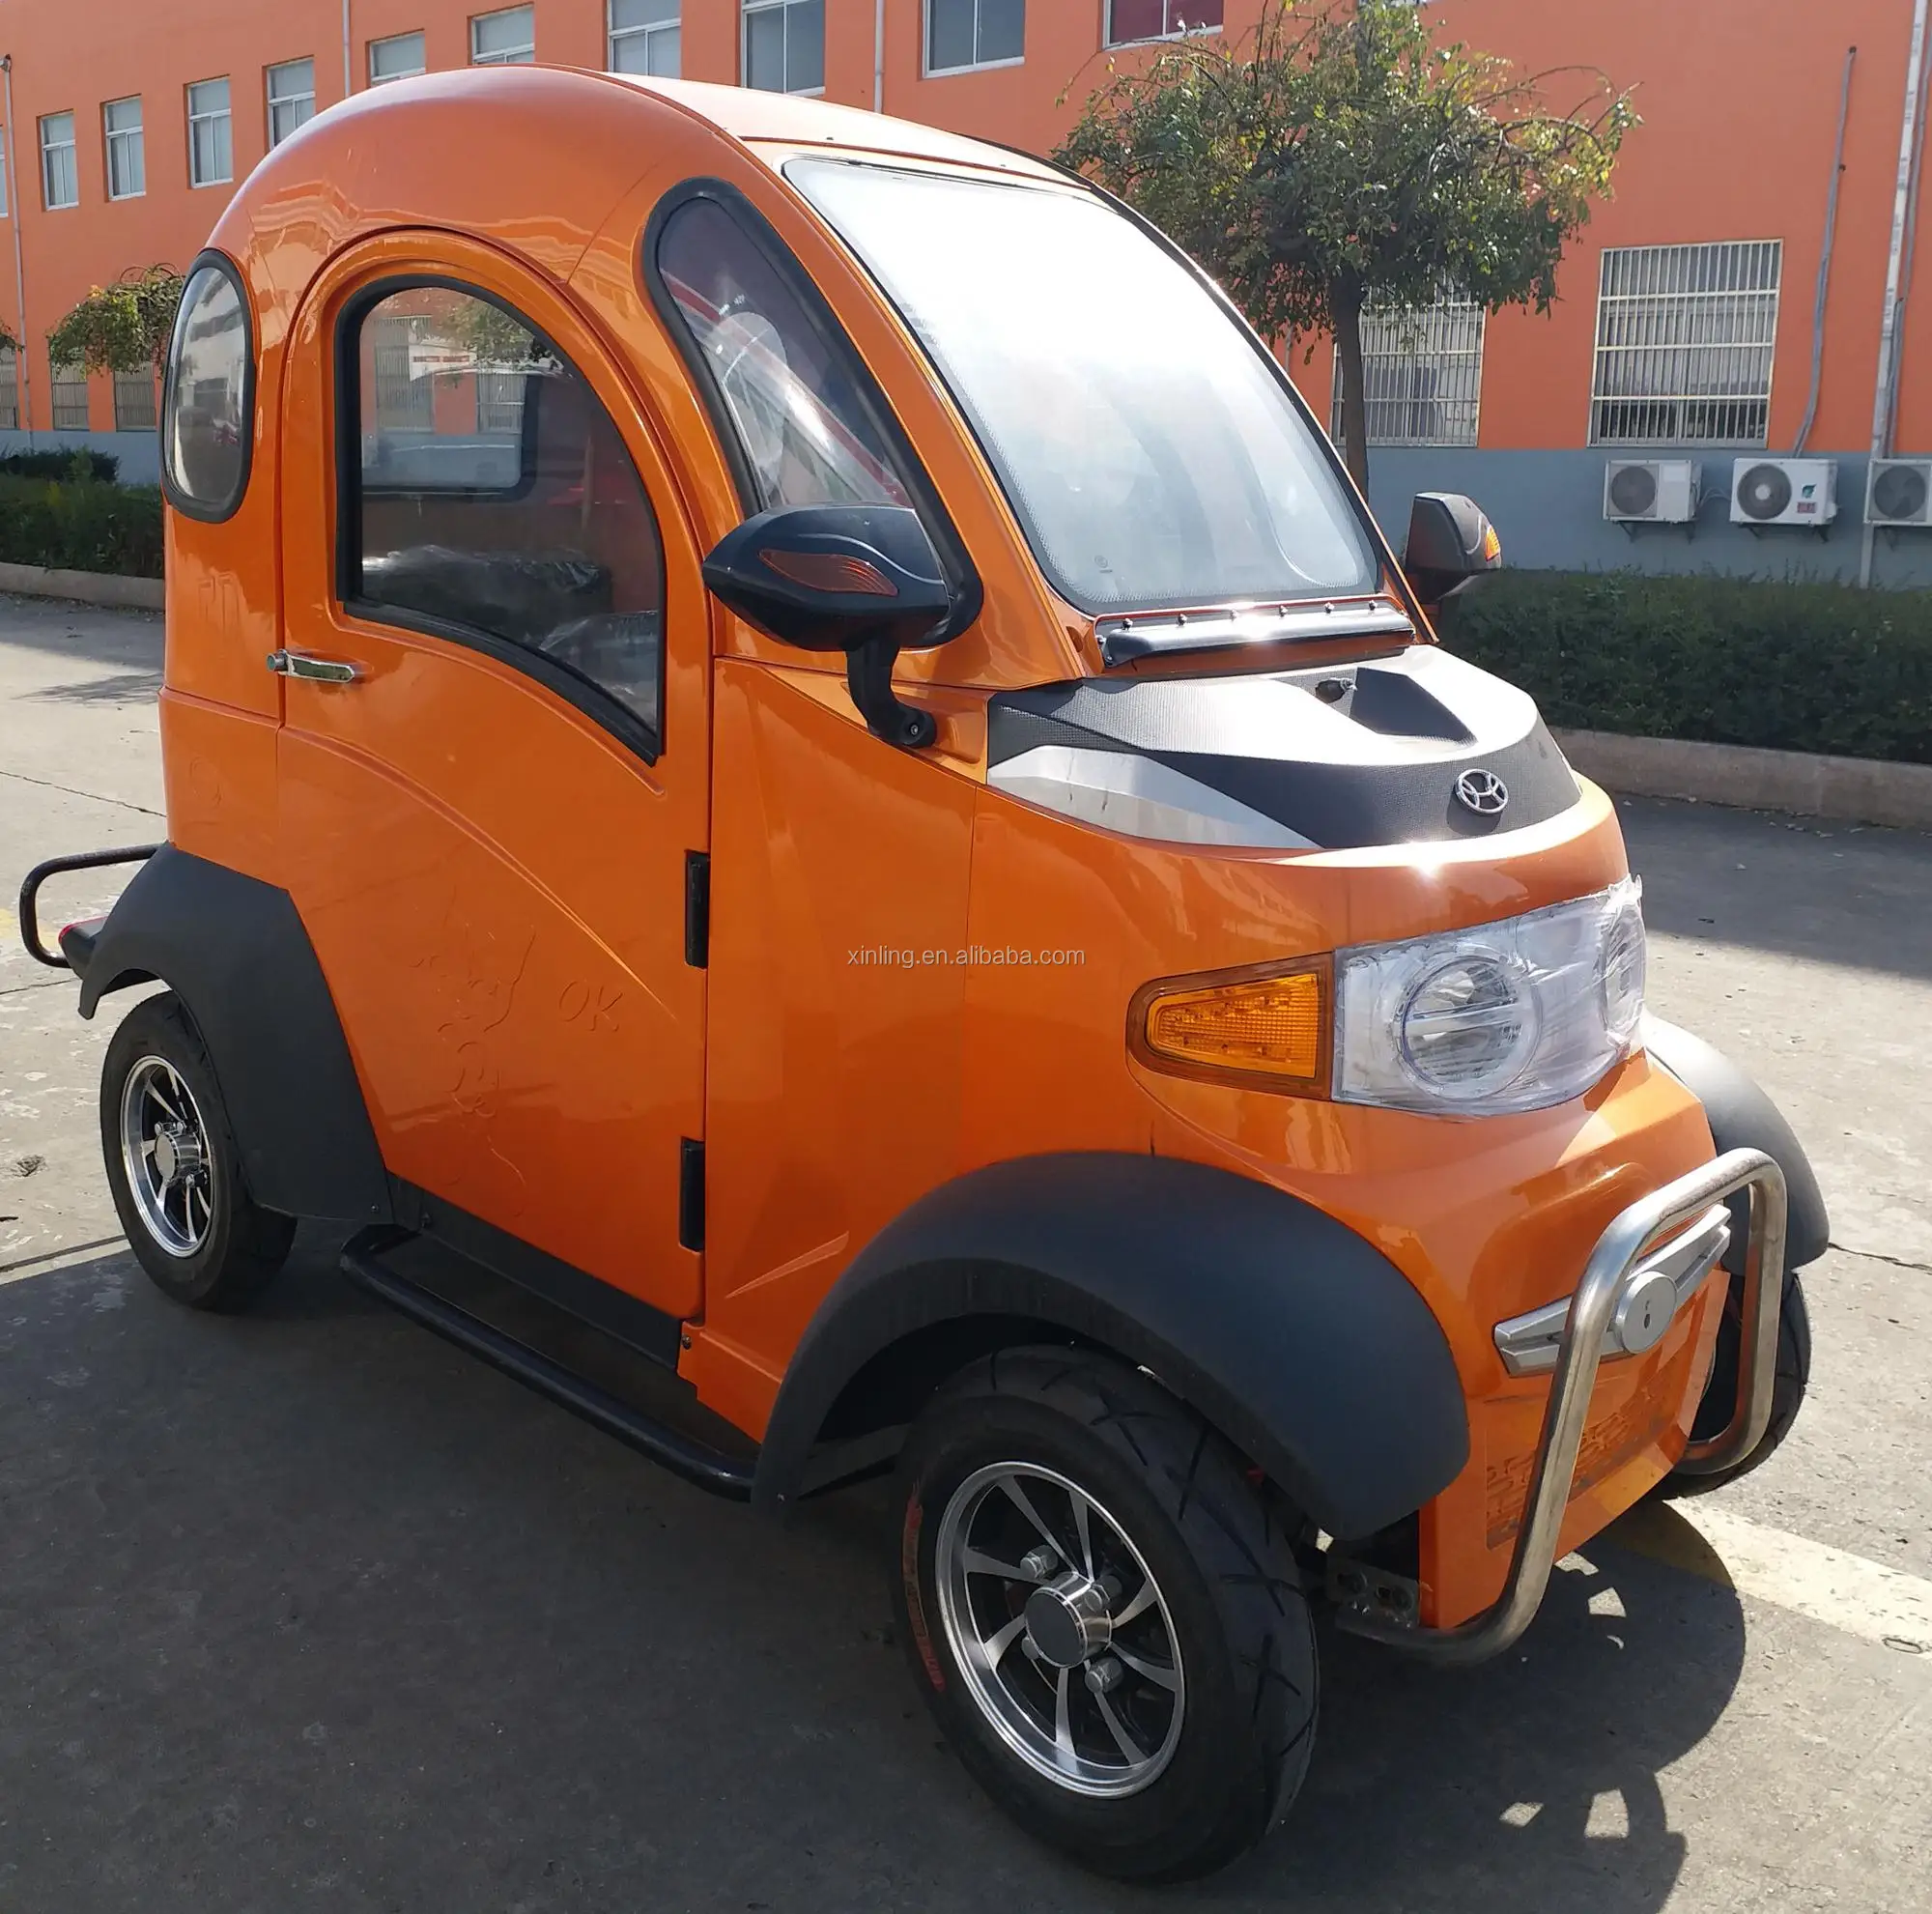 2018 60v1000w New Model Electric Cabin Four Wheel Enclosed Mobility